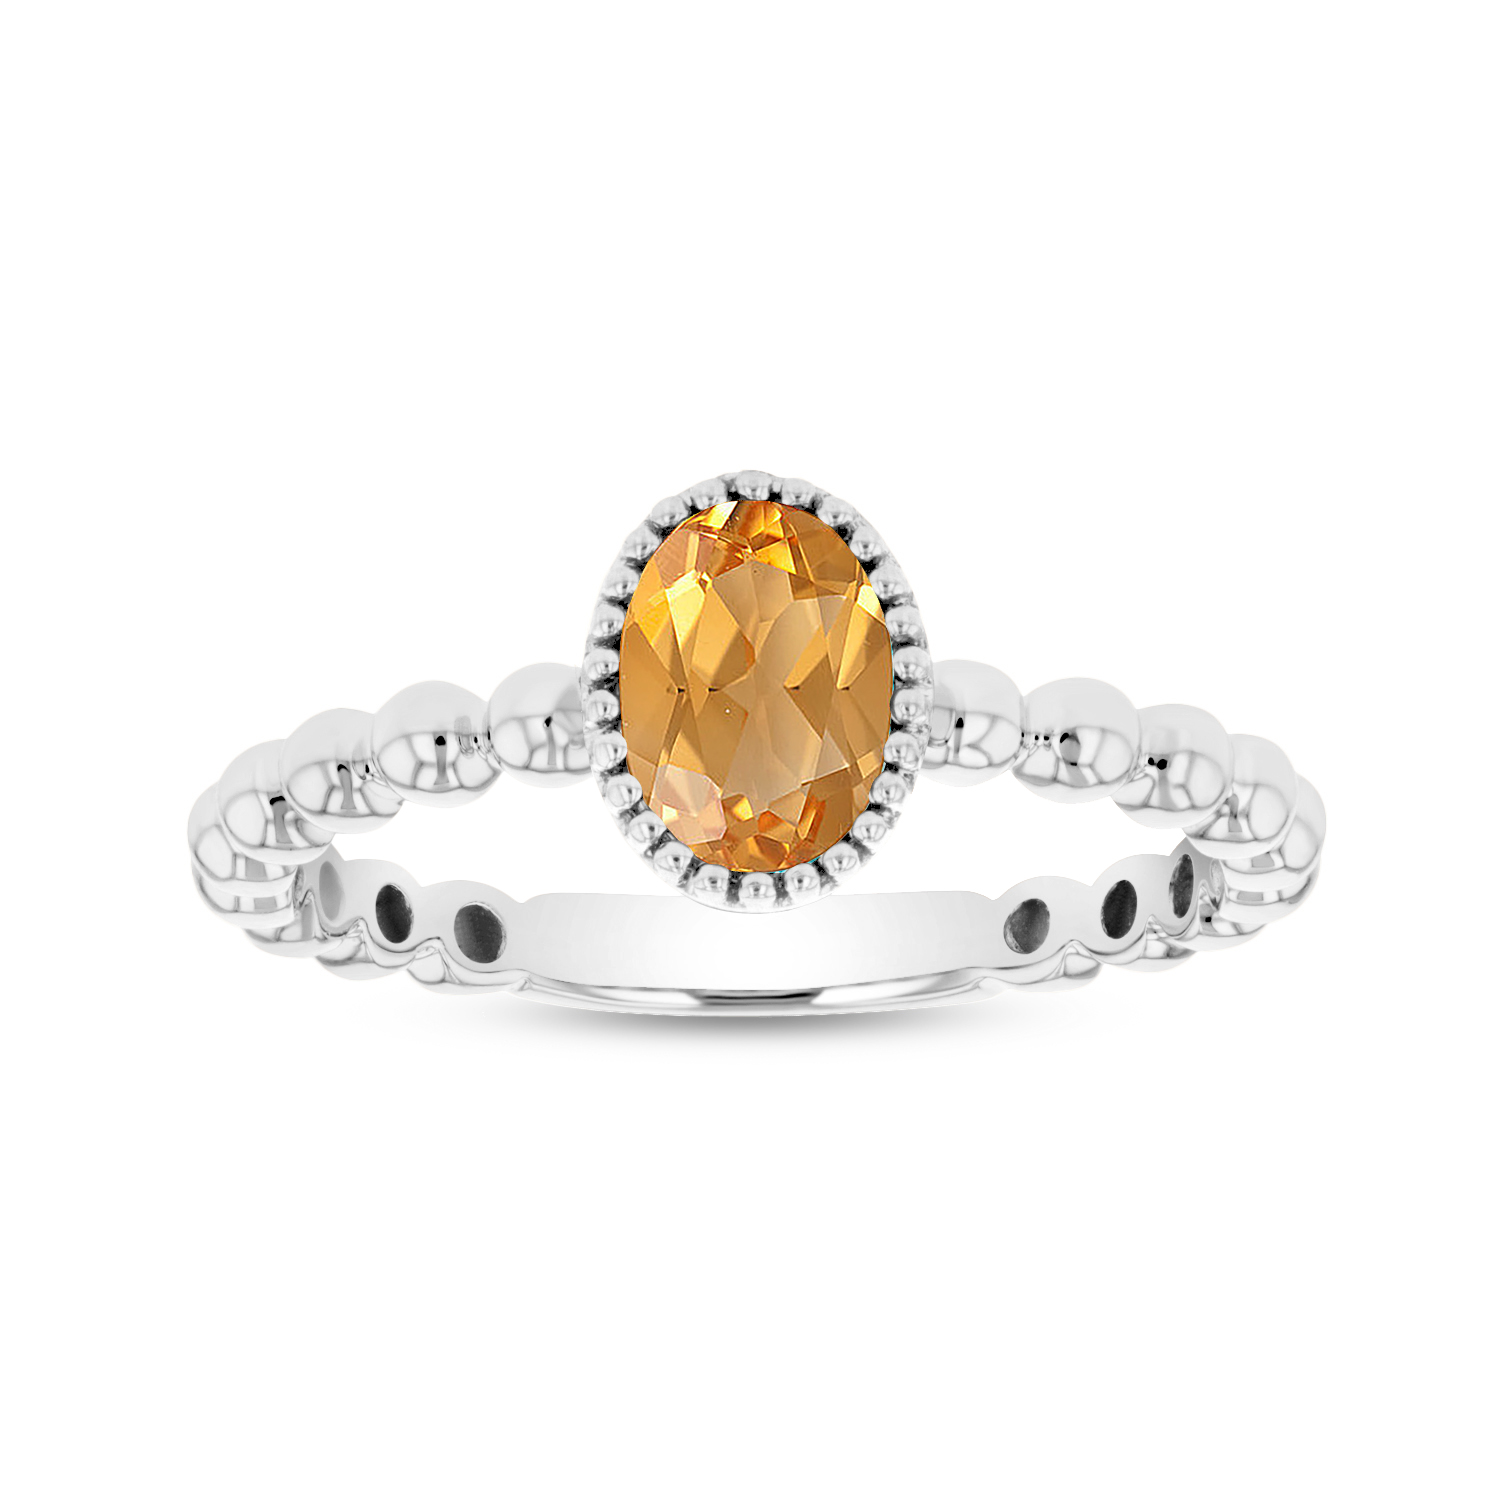 View 7x5mm Oval Citrine Ring in 14k Gold